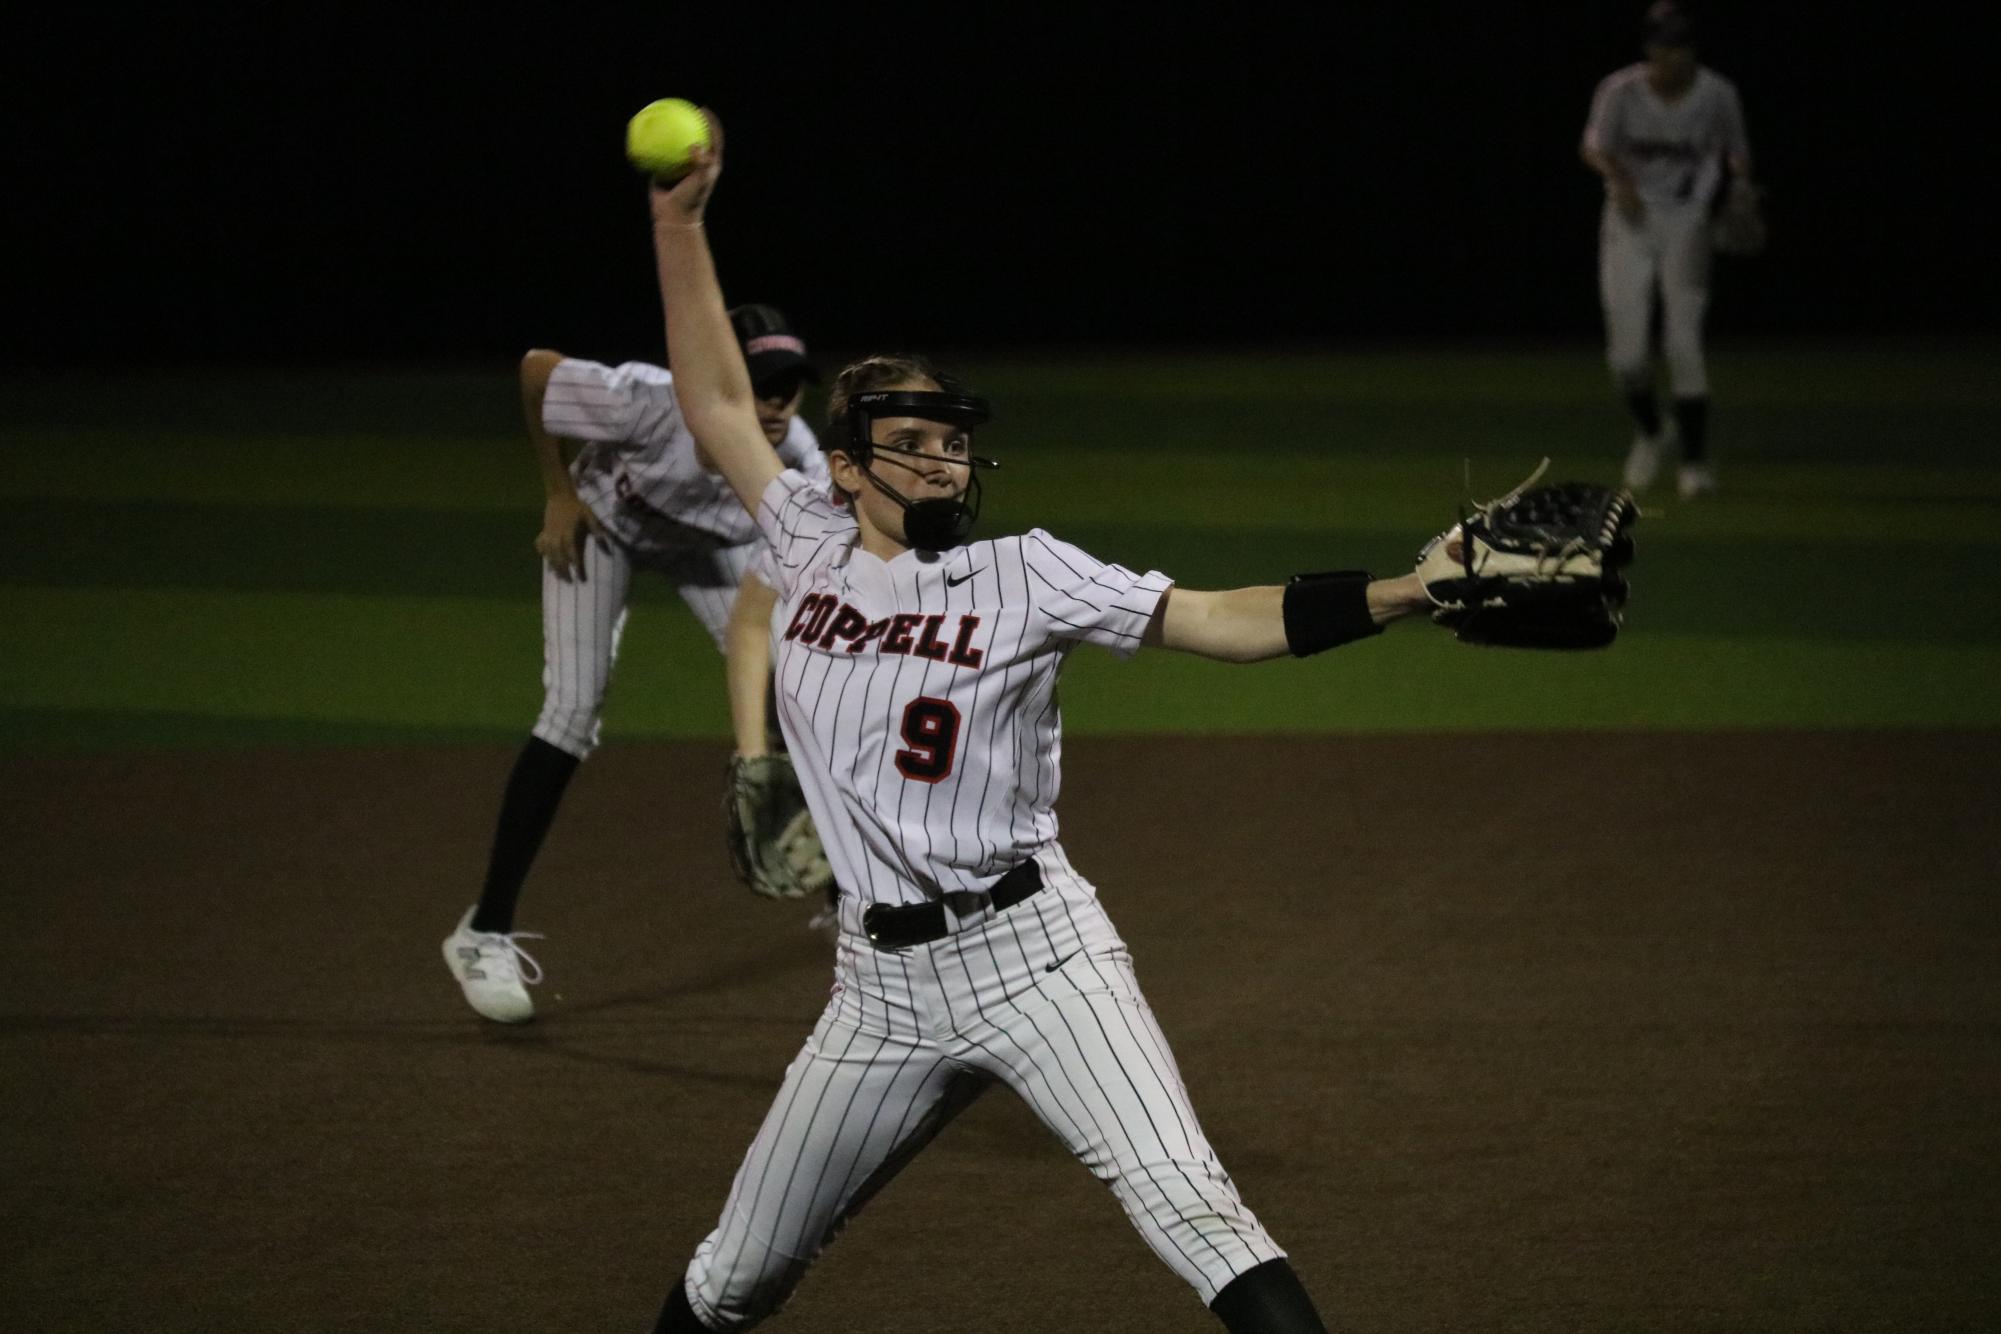 Coppell Softball: Pitching Crucial in Victory Quest vs. Plano Senior